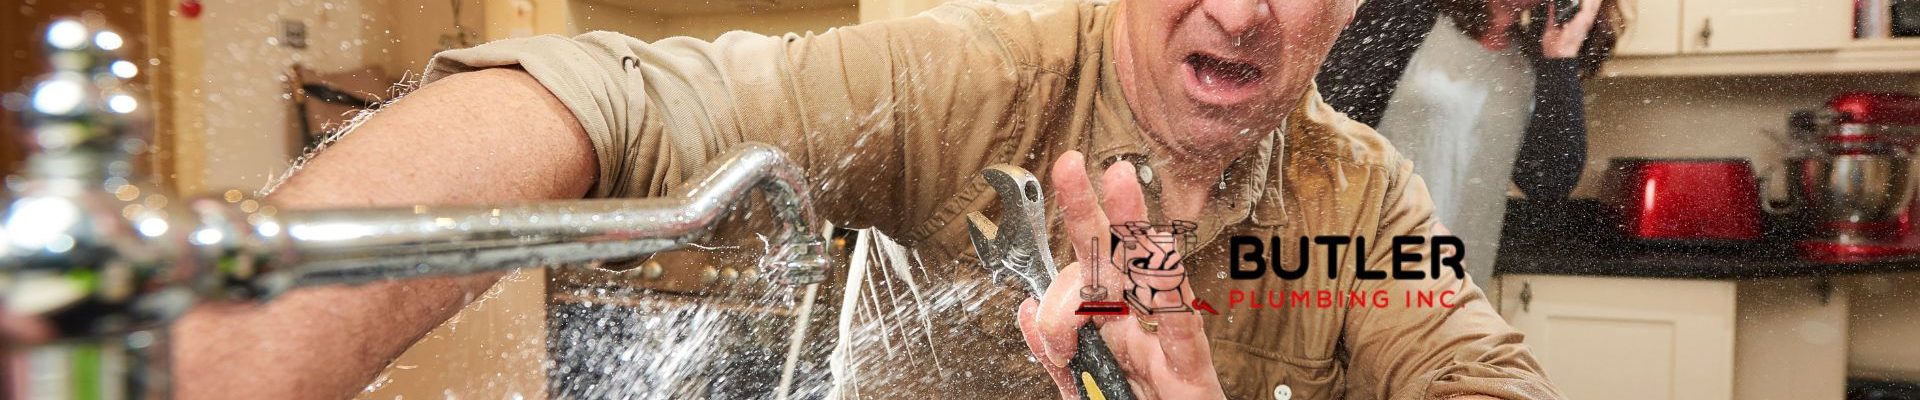 Tips For Troubleshooting Common Plumbing Problems In Midwest City, Oklahoma